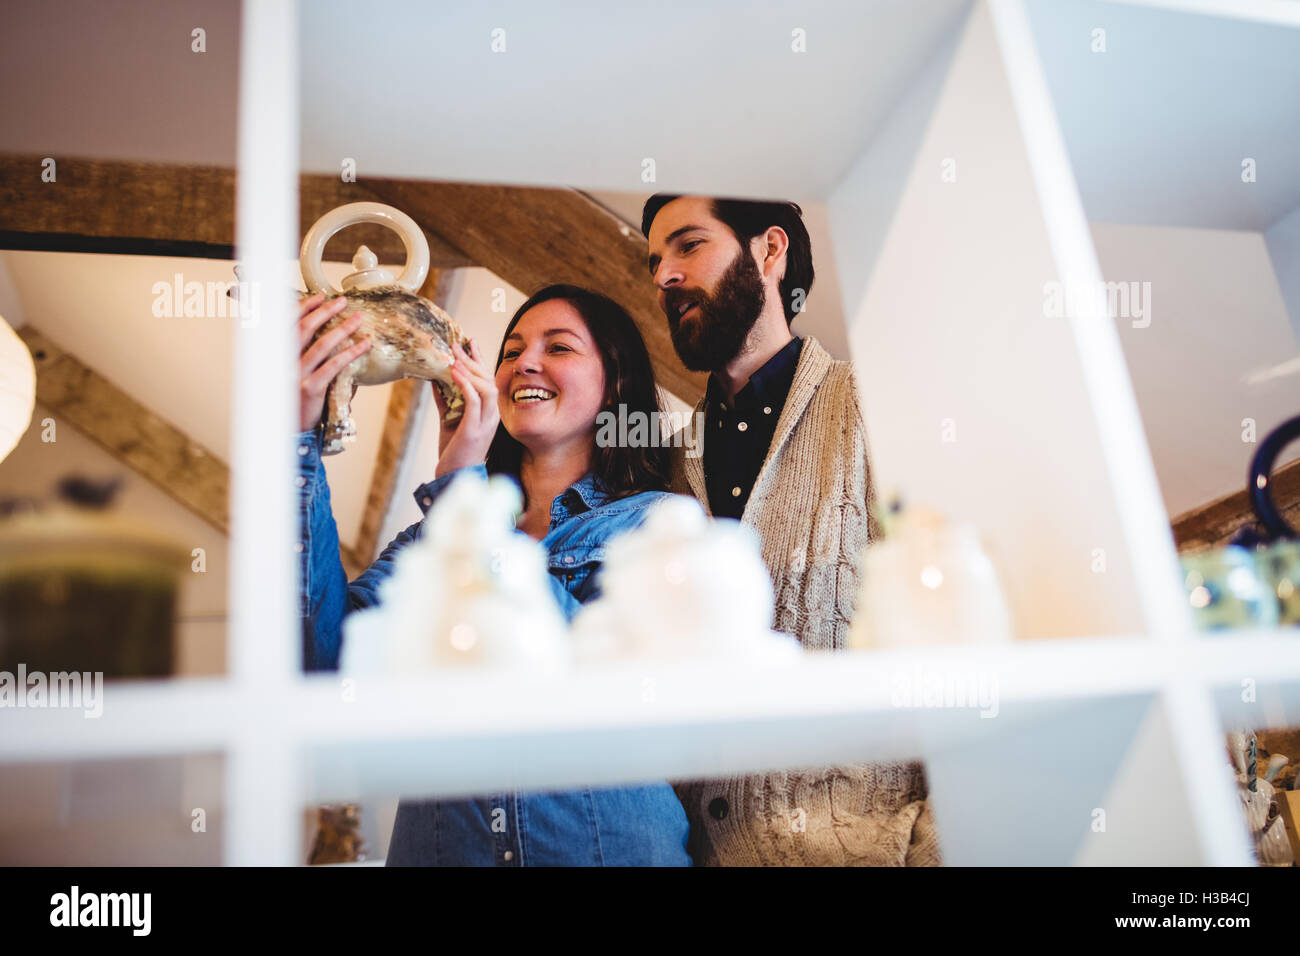 Smiling woman with man at store Banque D'Images